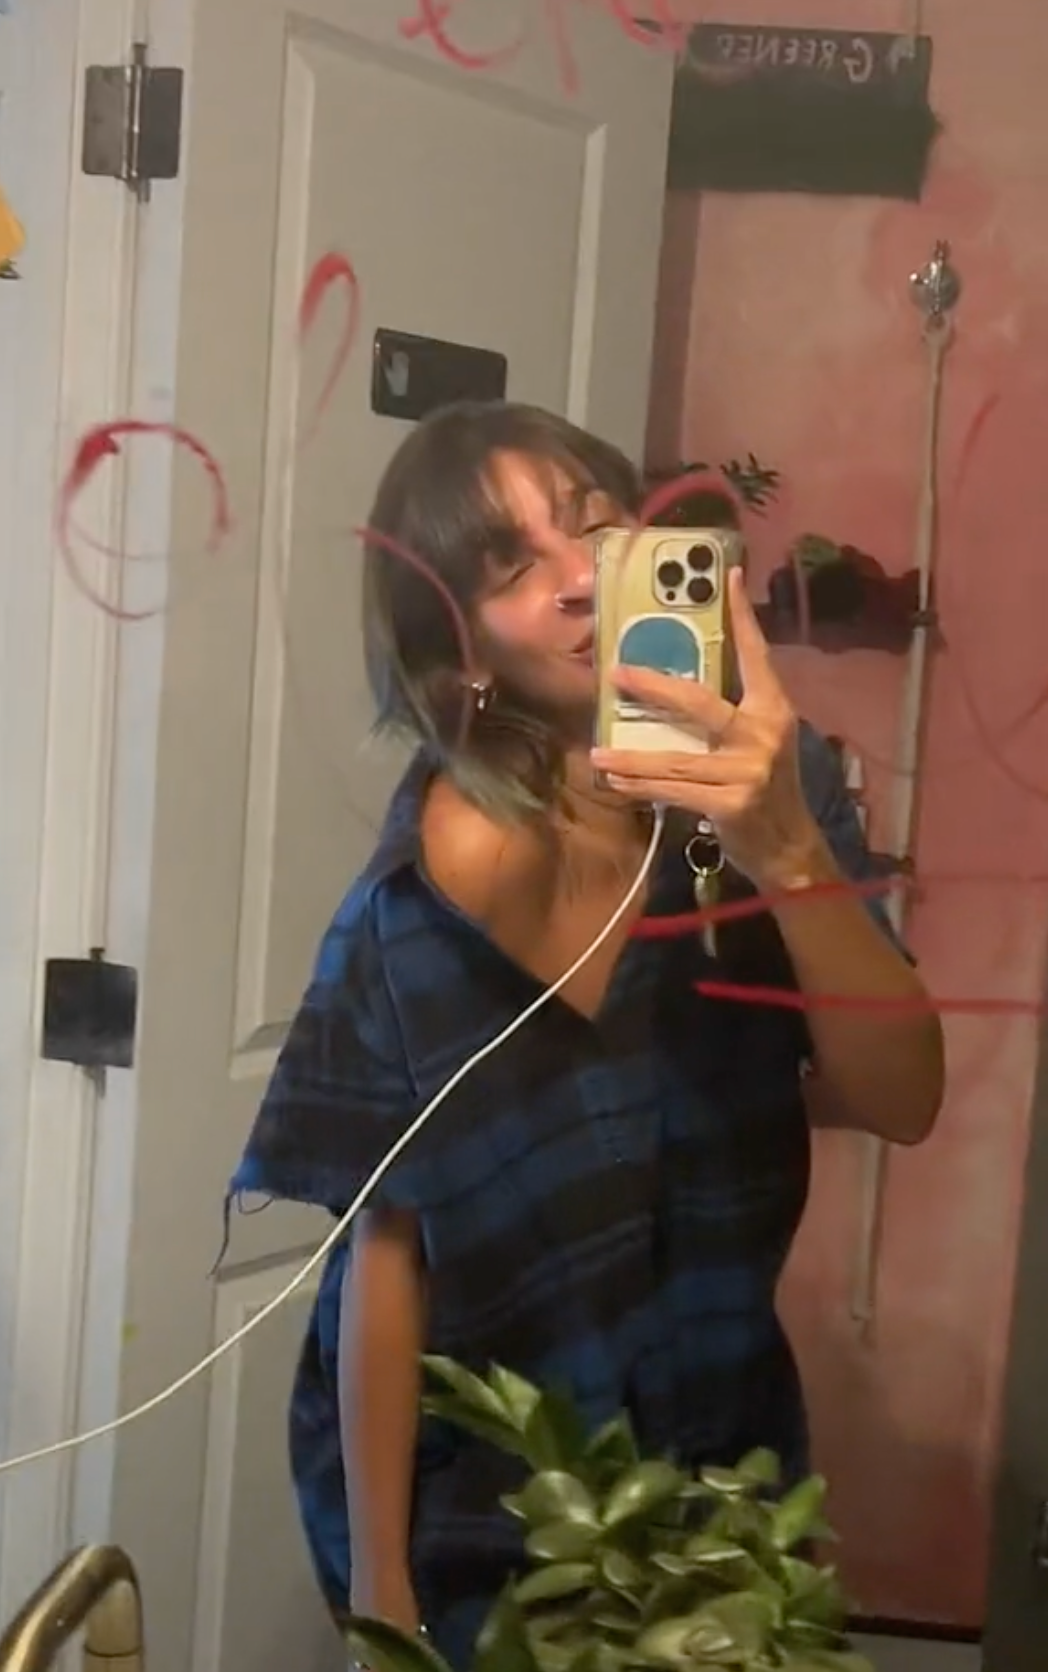 Gabbi hanna taking a selfie in the mirror with red words written on it